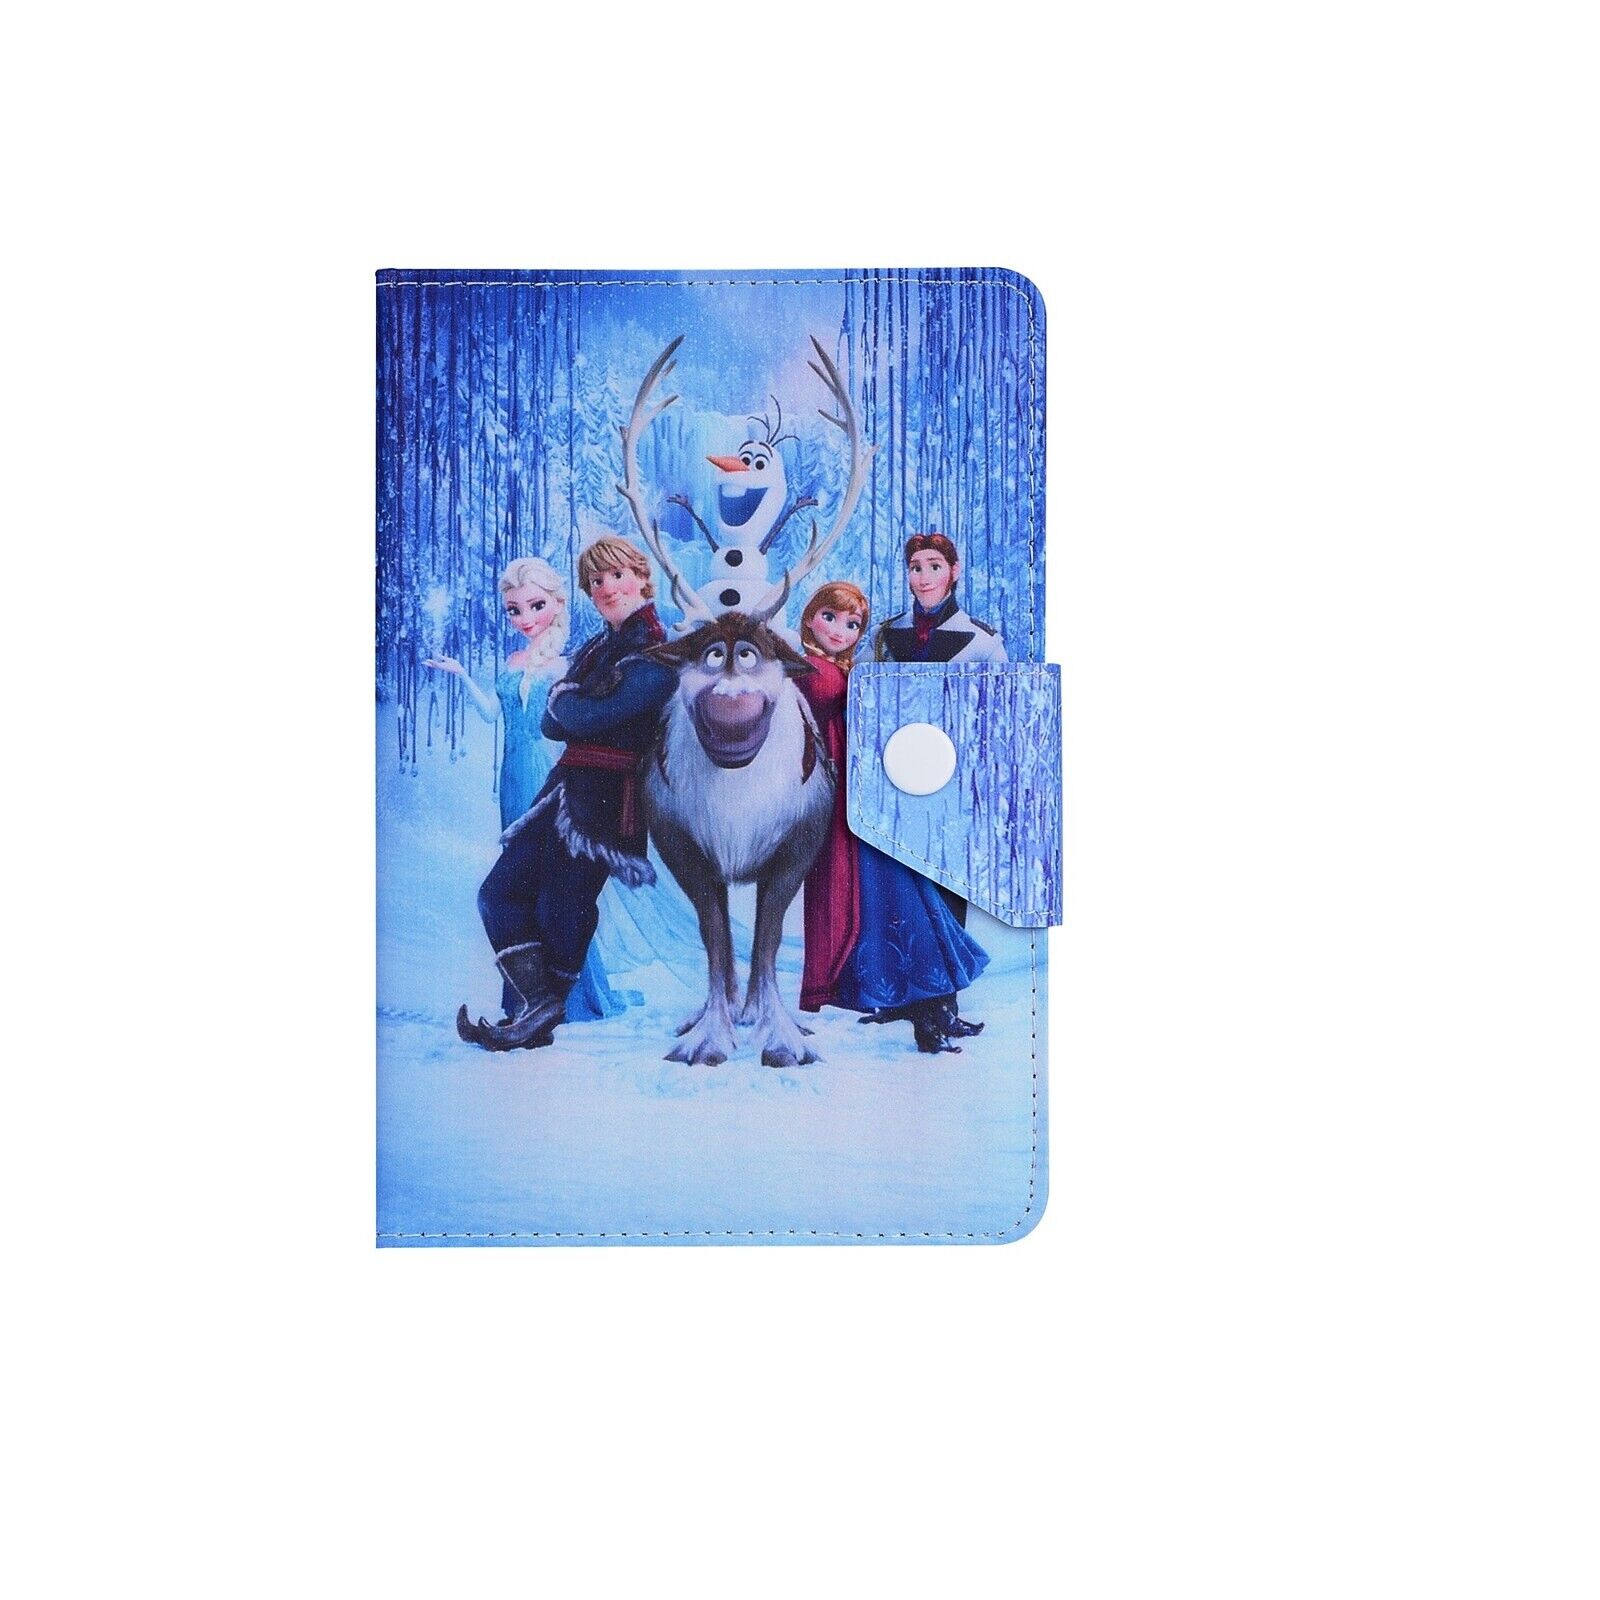 Frozen tablet case for kids /Adults Protective Stand-up cover for 7